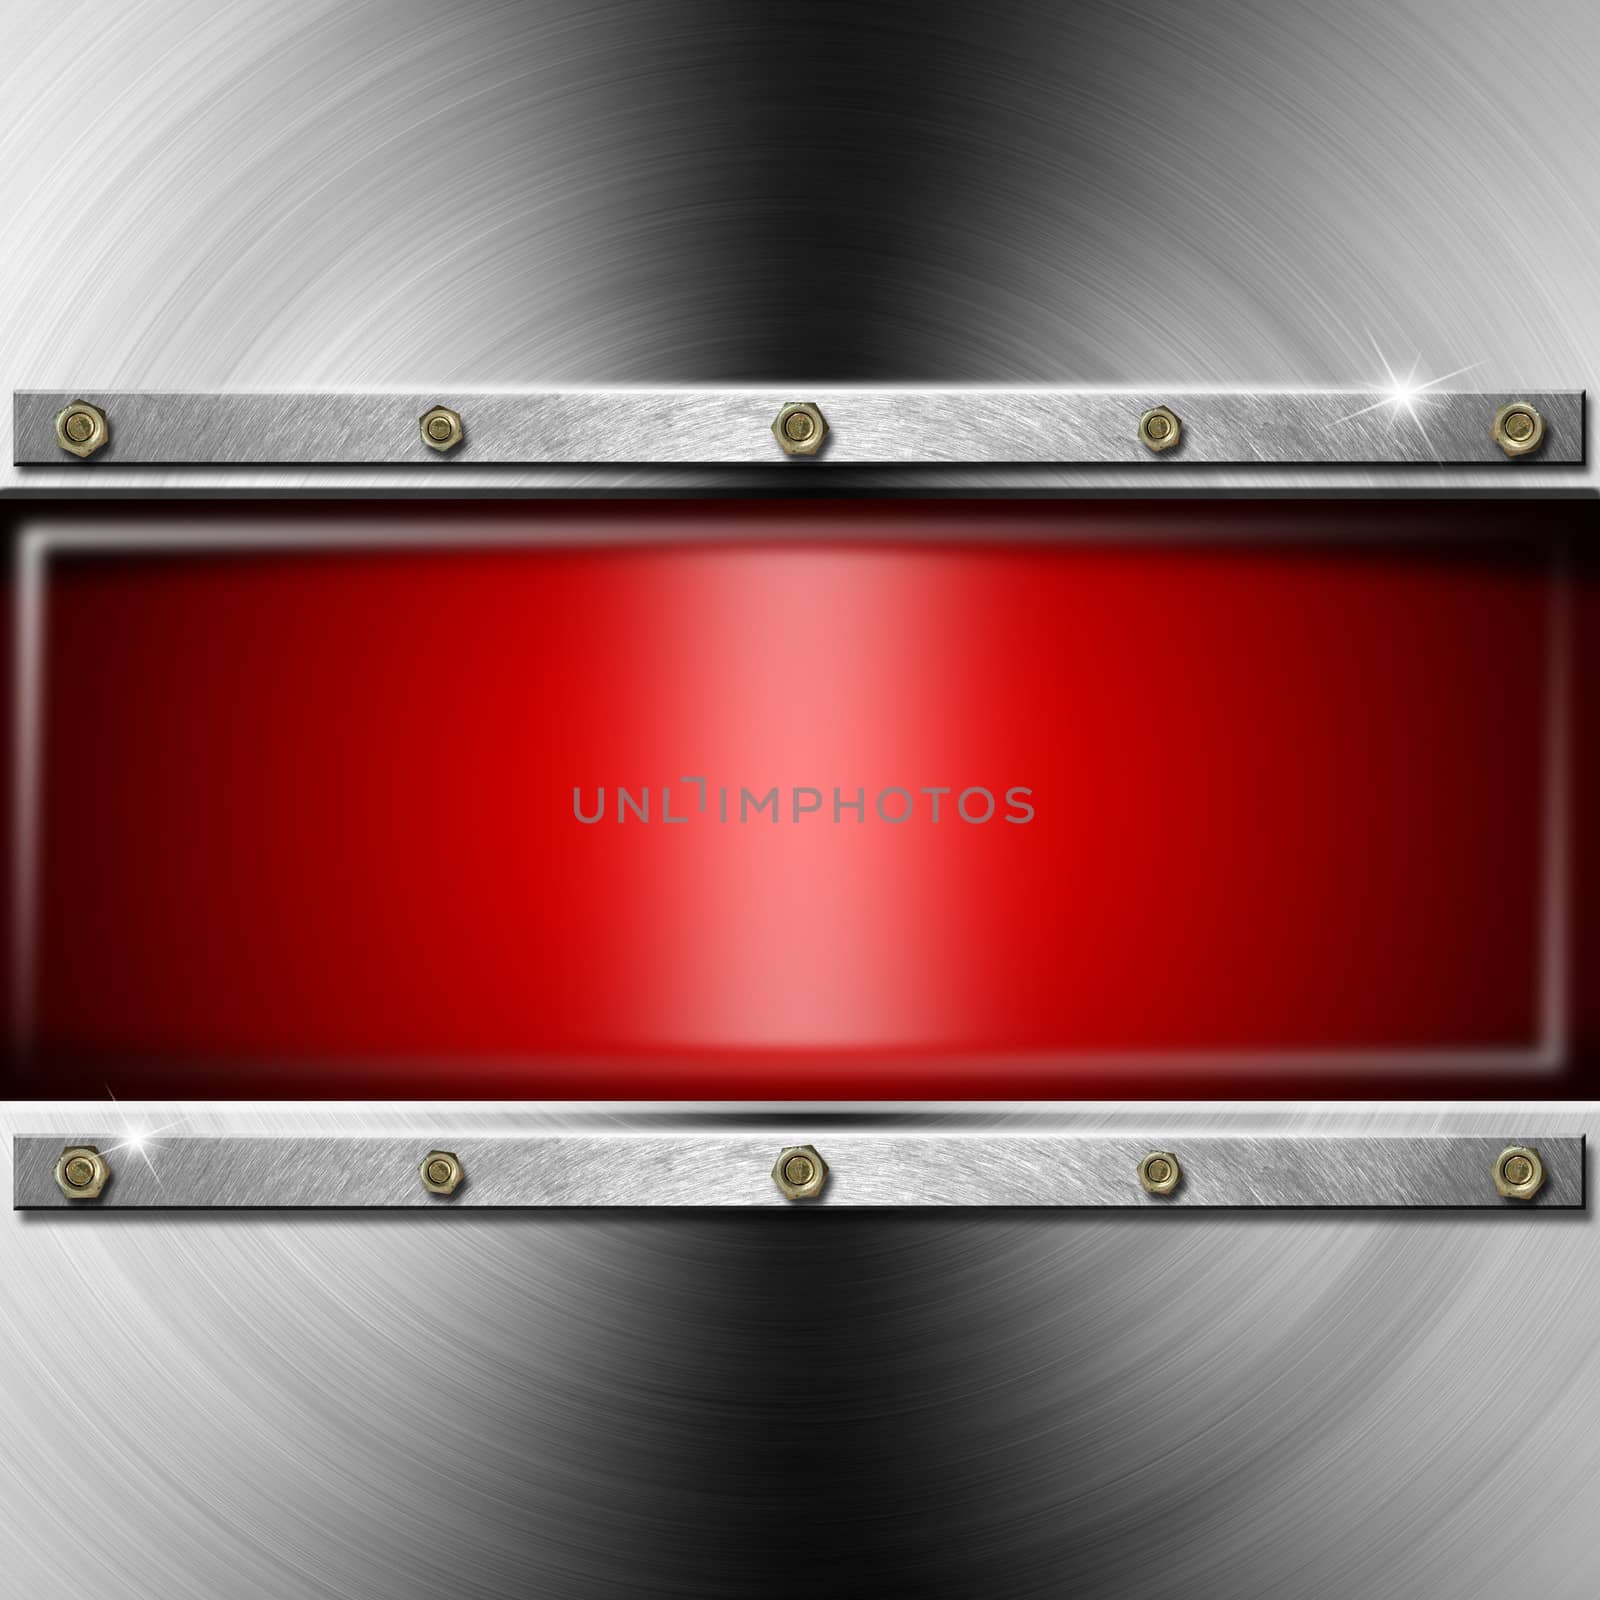 Metallic and industrial template background with red screen
